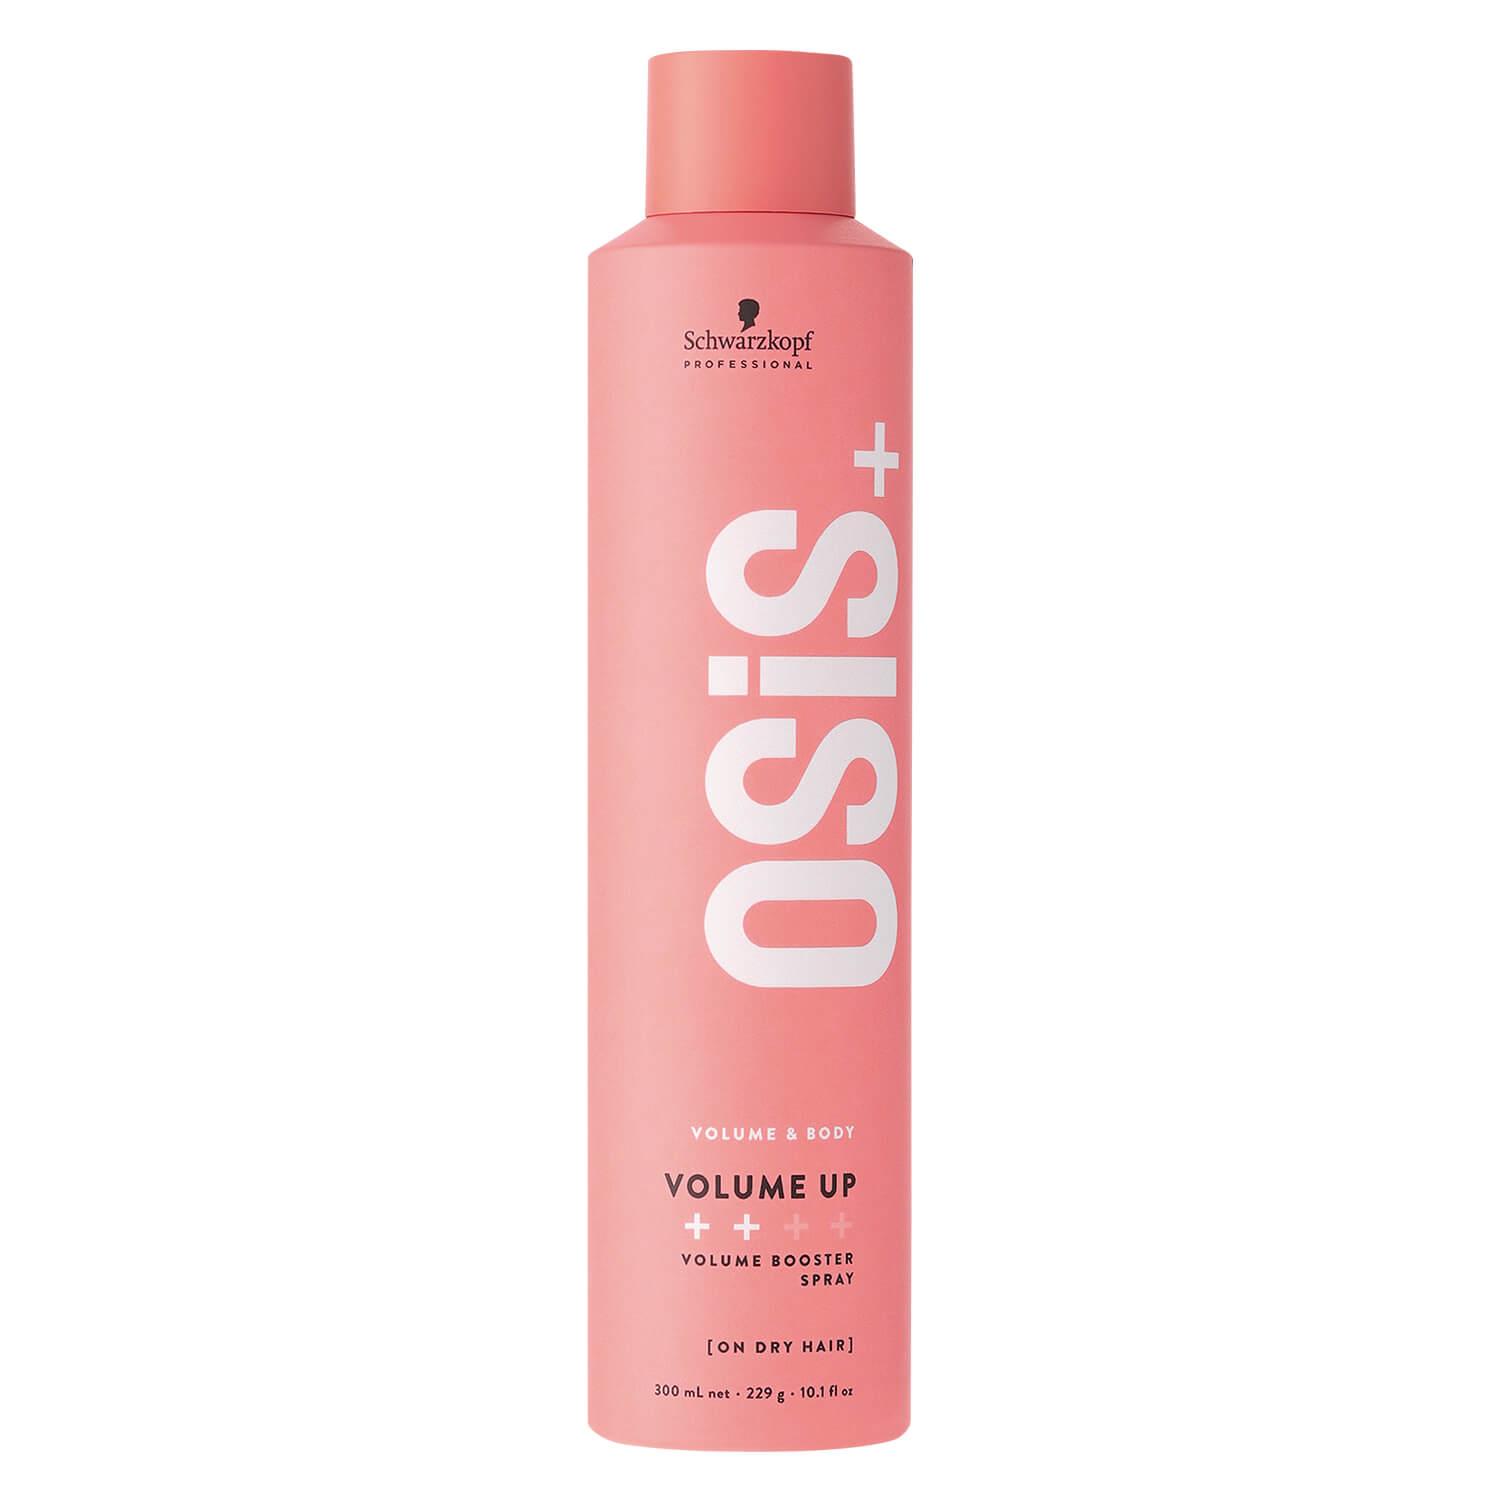 Osis - Volume Up